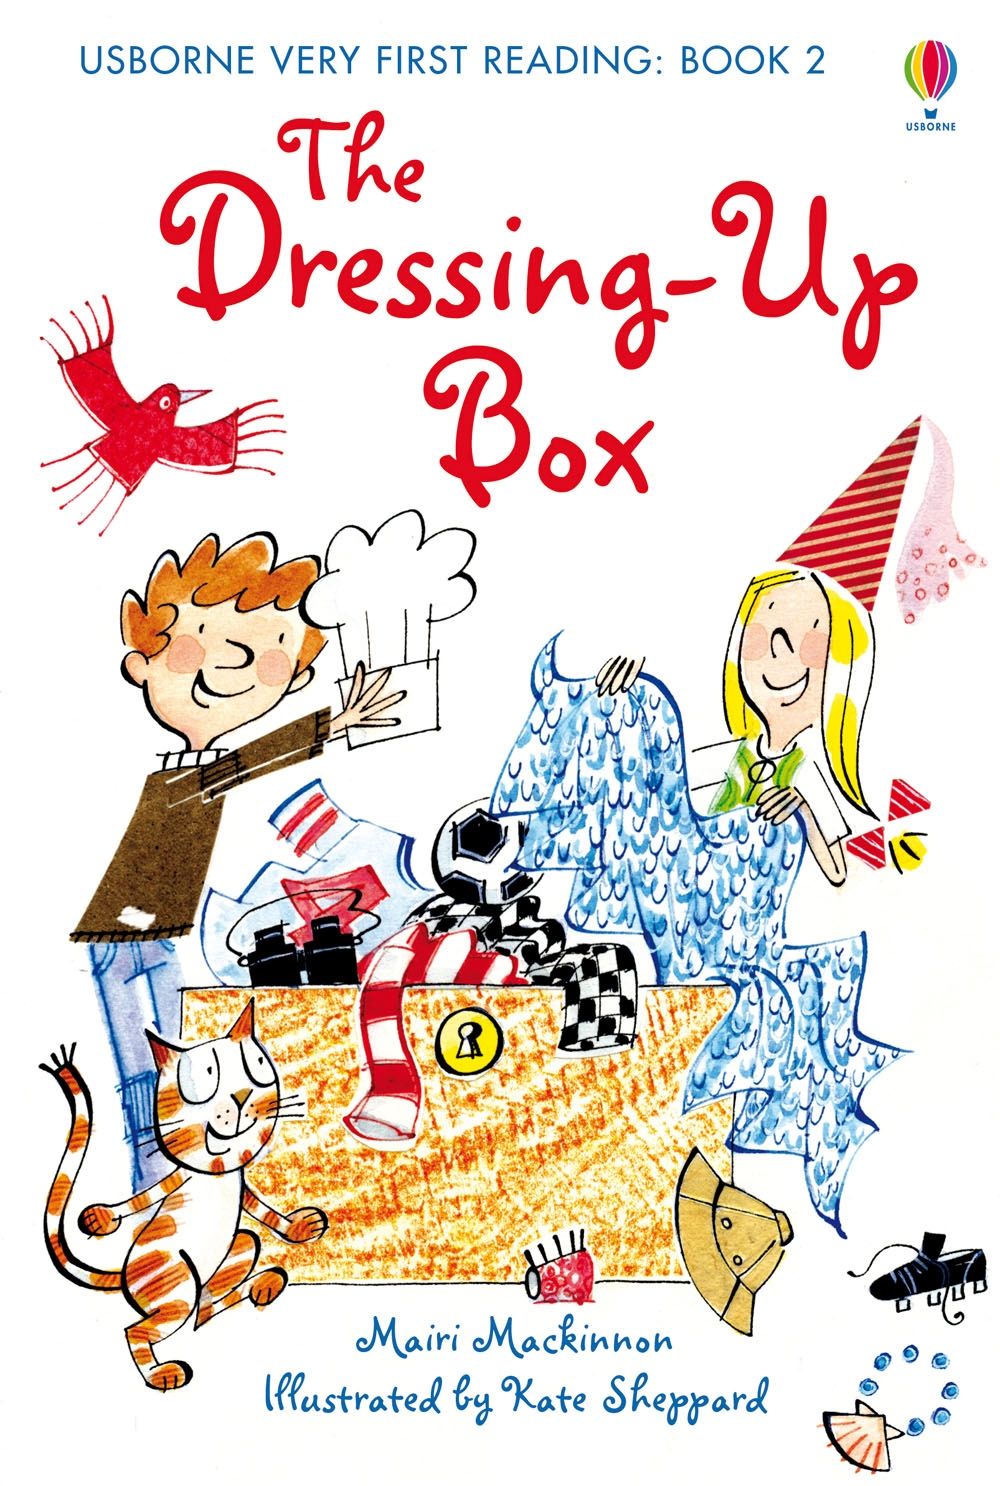 2. The Dressing-Up Box